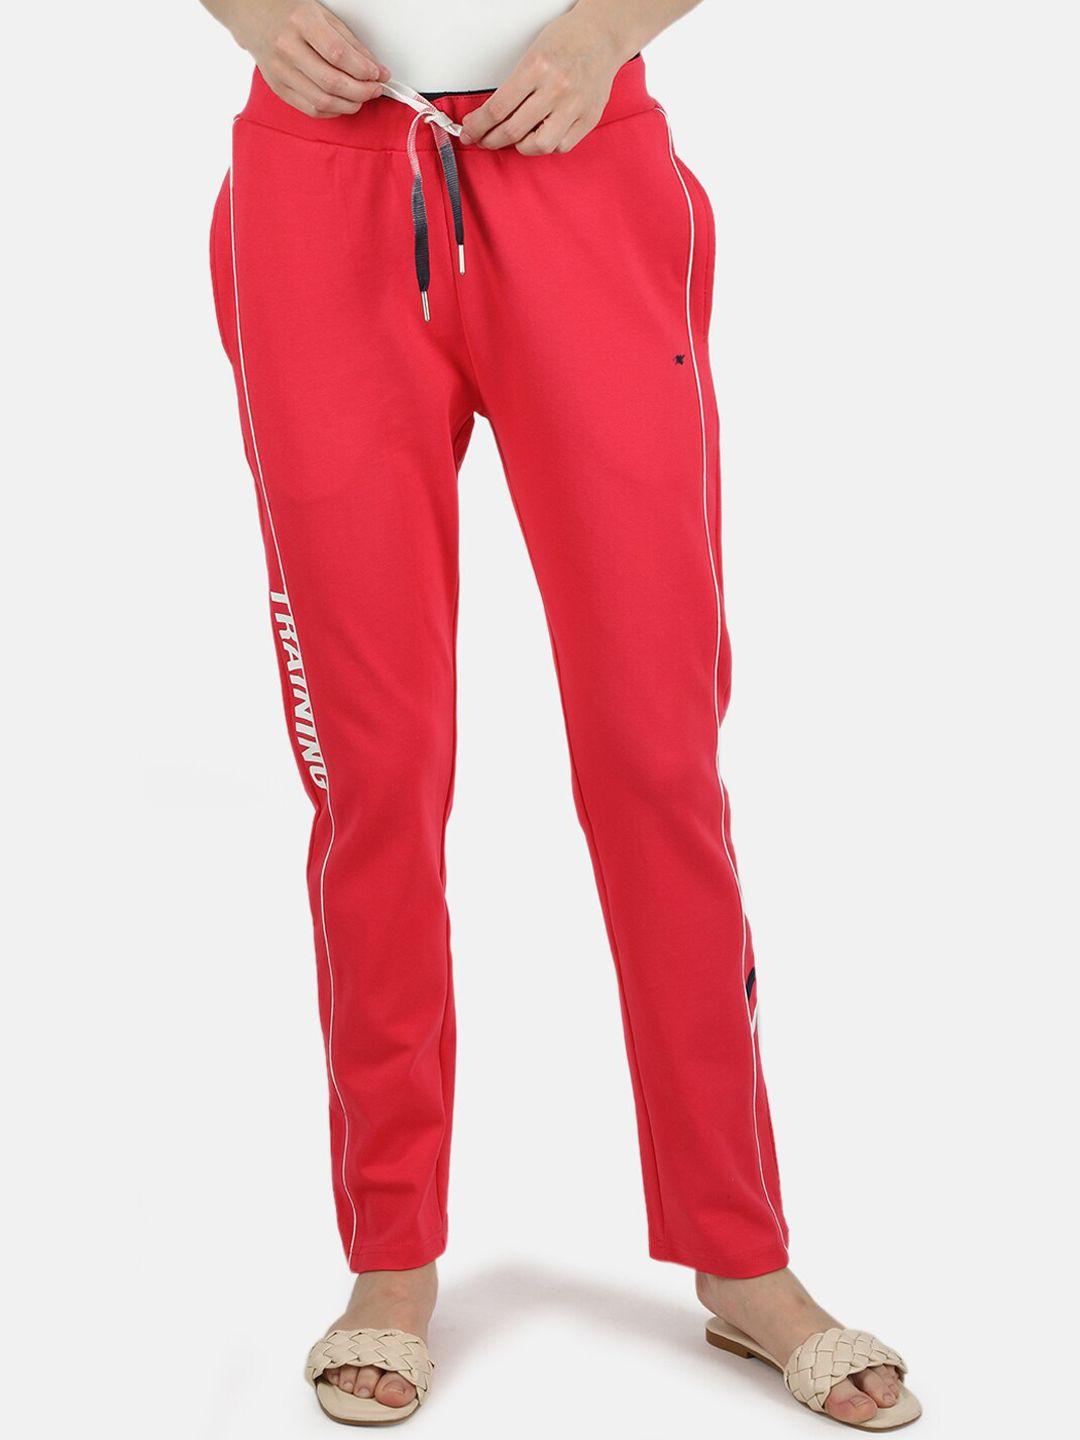 monte-carlo-red-mid-rise-lounge-pants